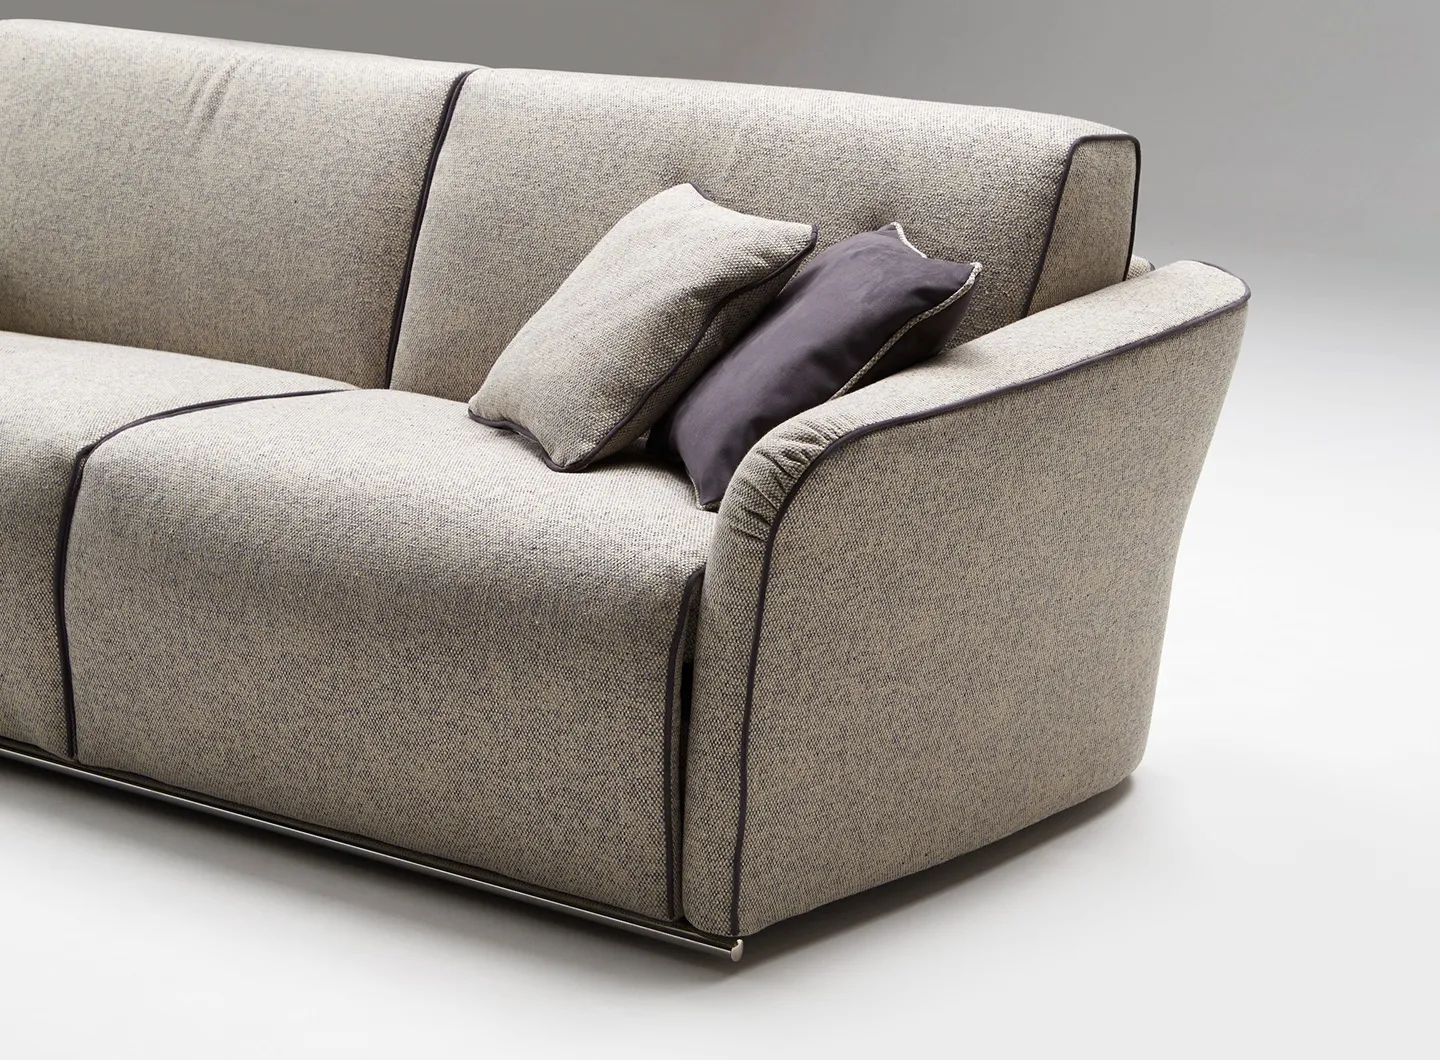 Milano Bedding - Groove sofa bed